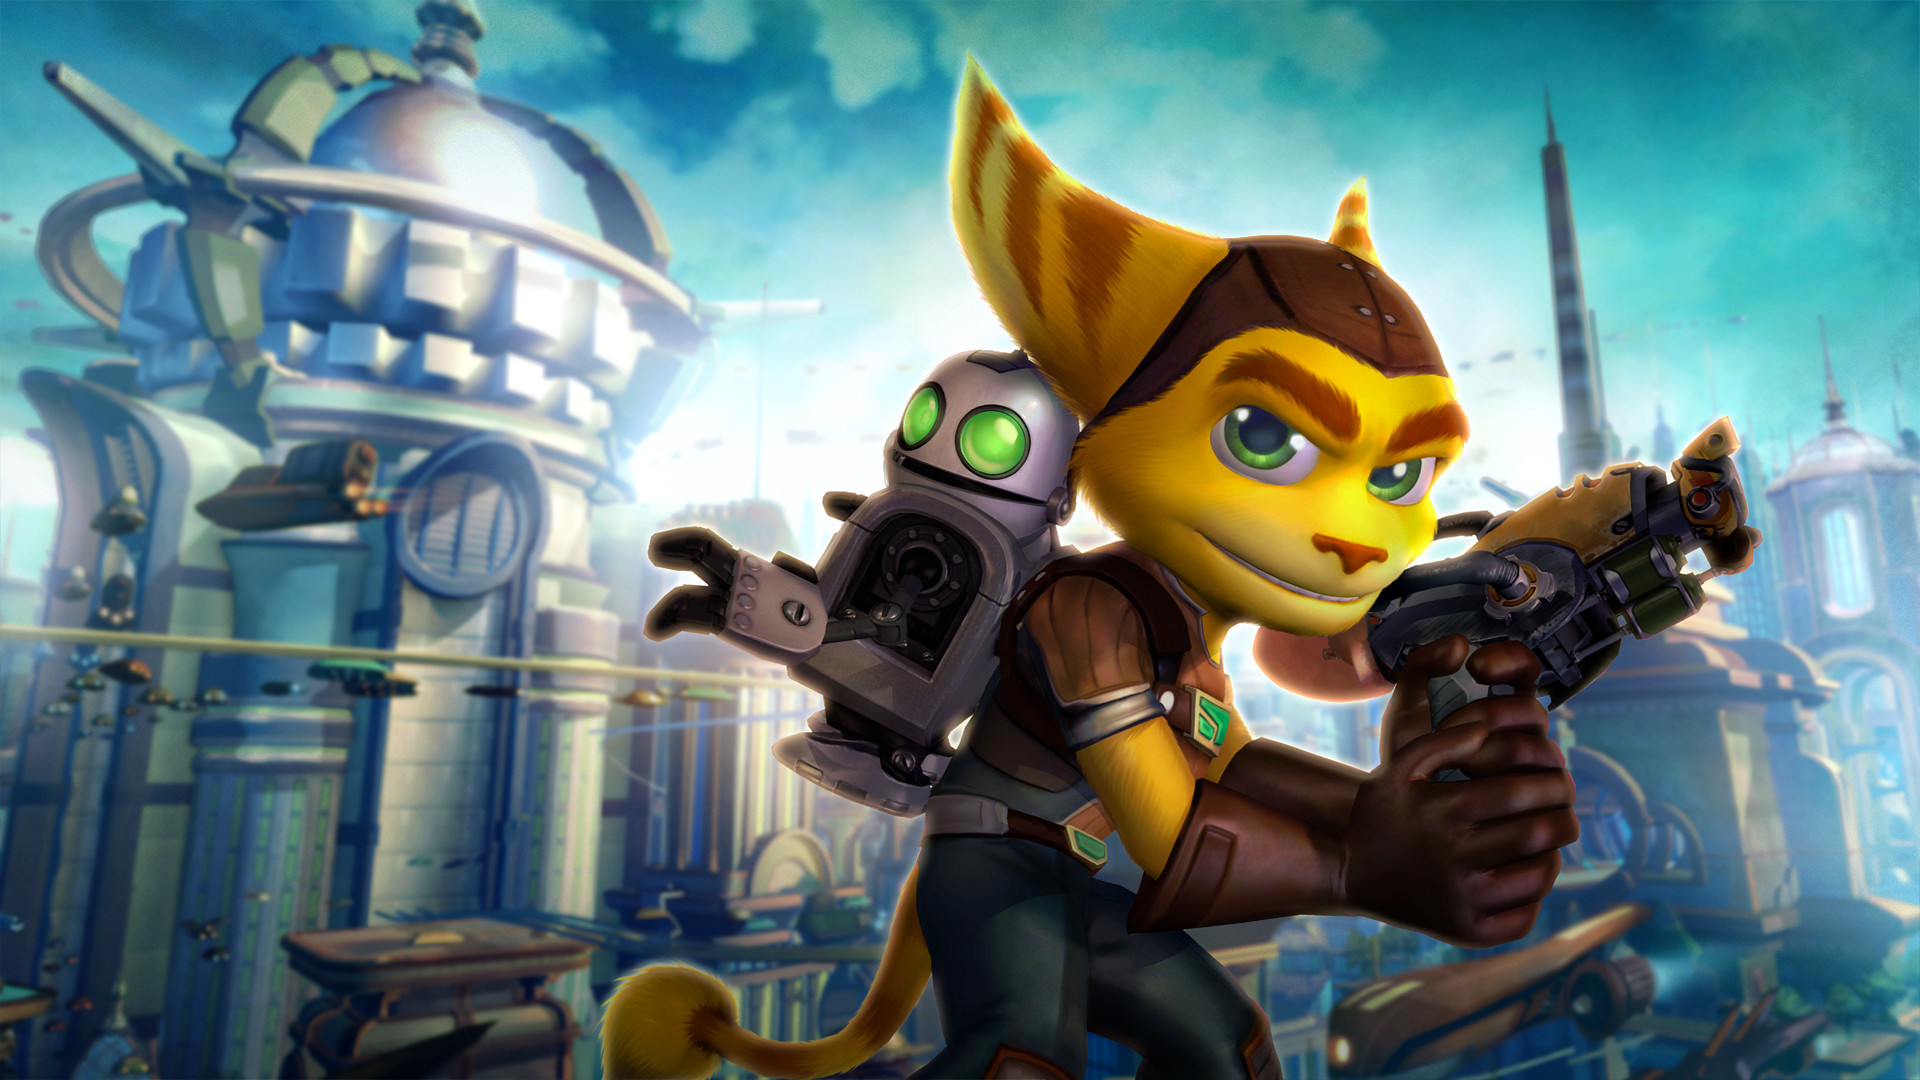 1920x1080 Ratchet and Clank Wallpaper